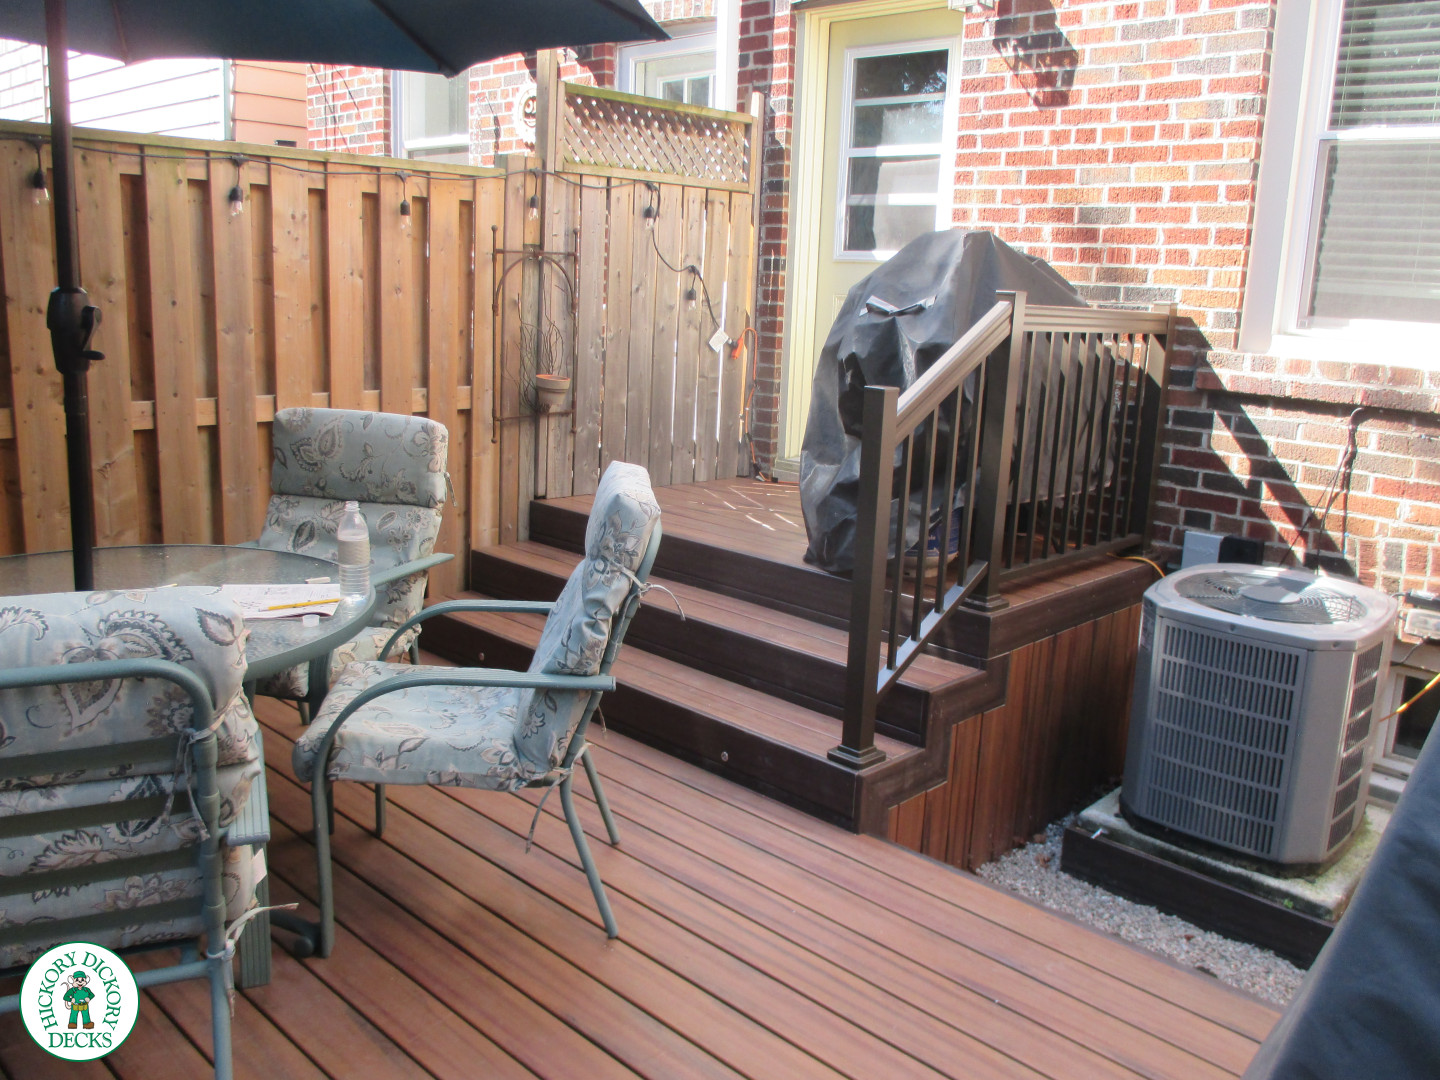 Small 2 level brown deck with lighting in steps.